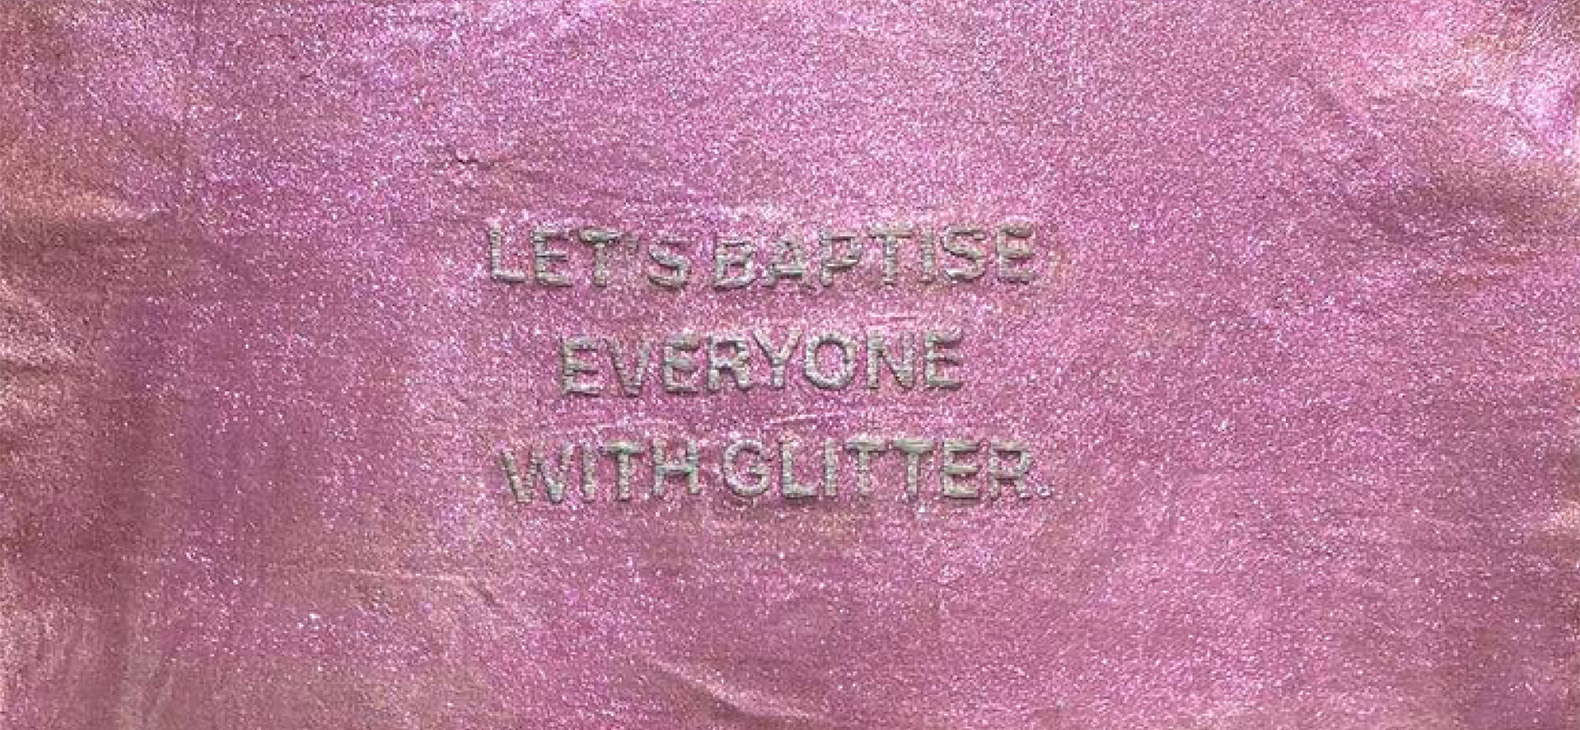 The image shows a detail of the artwork of the artist Mariandrie Chrysostomou. The background is pink and glittery. In the center is a lettering in glittery silver. The lettering reads "LET'S BAPTISE EVERYONE WITH GLITTER".